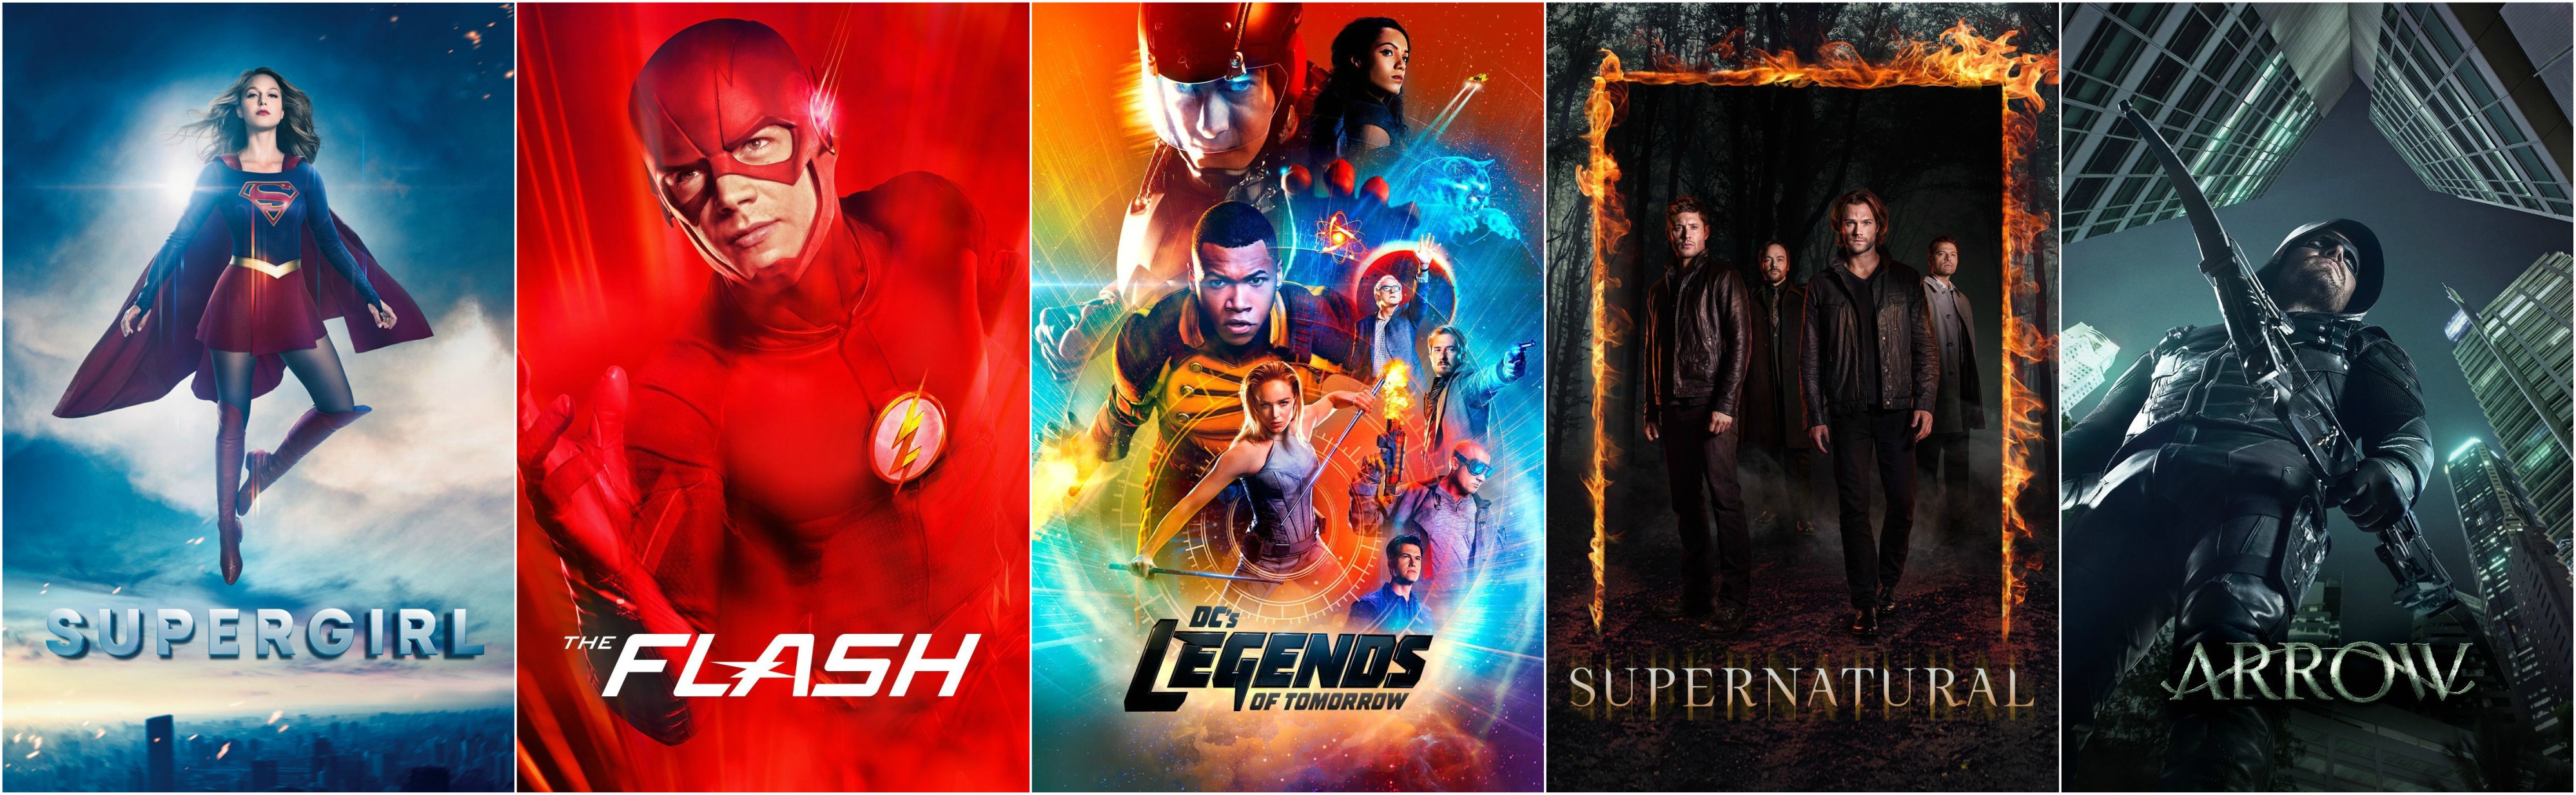 Fall Schedule for 'The Flash', 'Arrow', 'Supergirl' and More